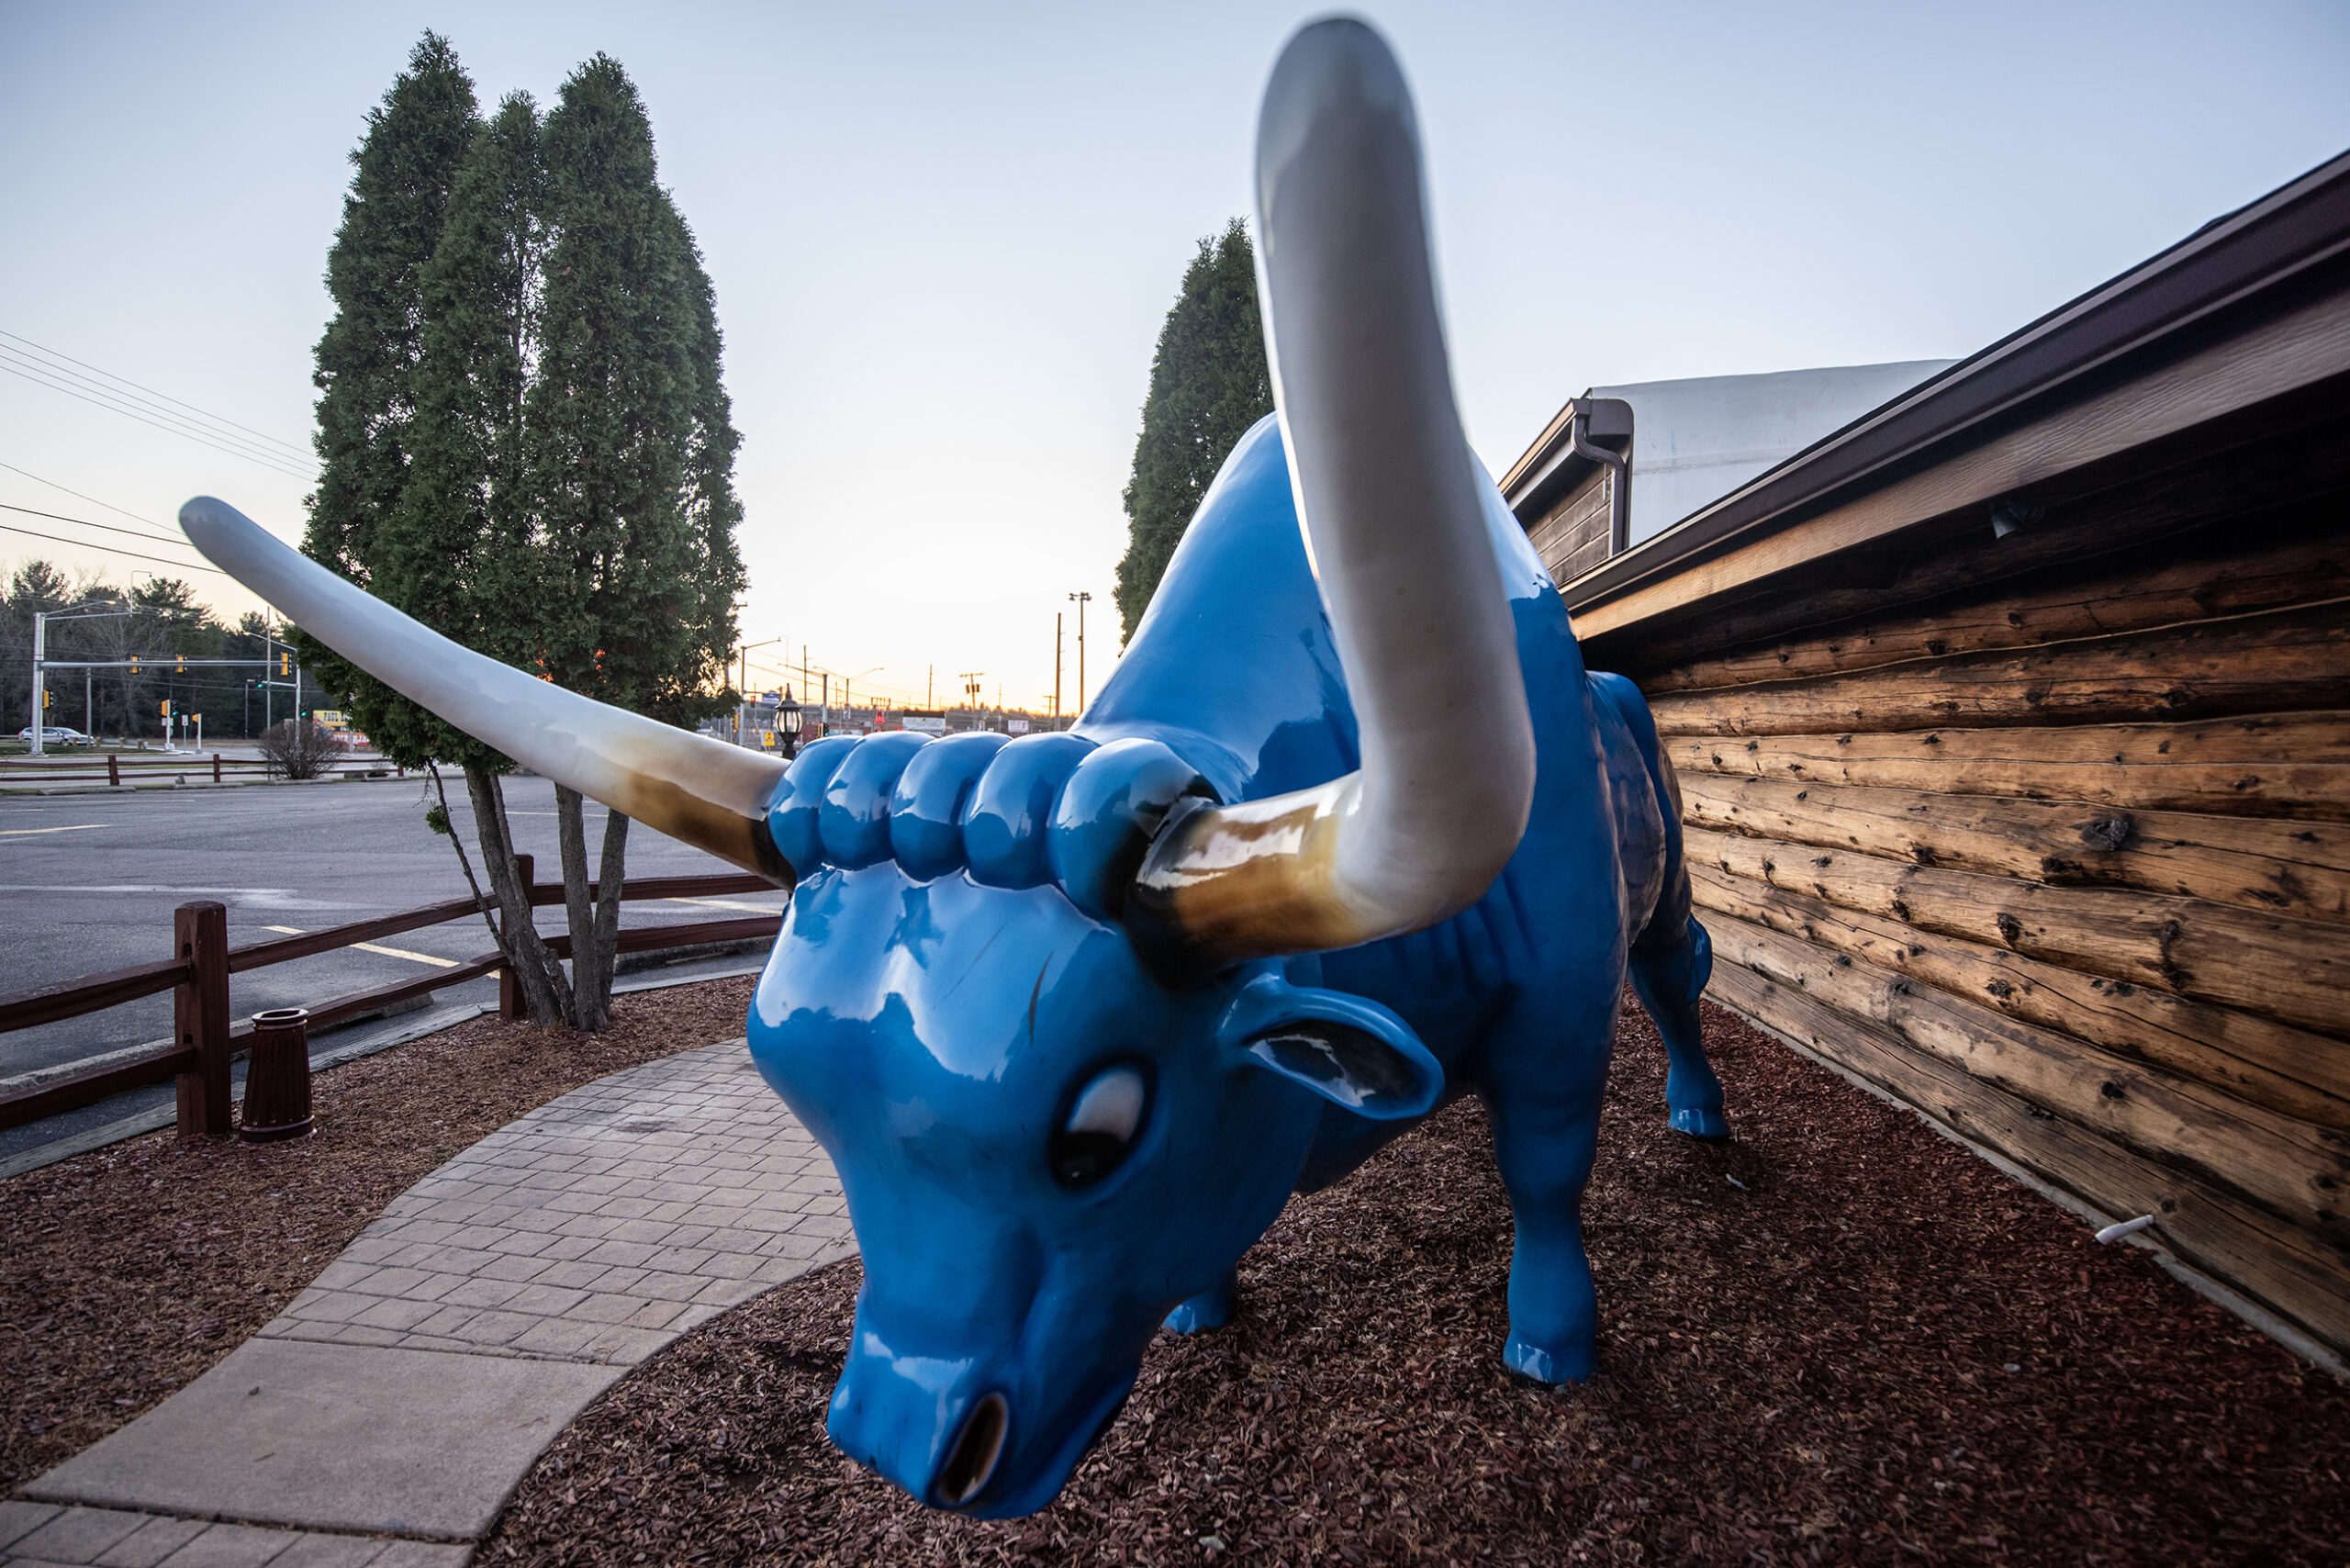 A blue ox with long white horns is displayed outside.